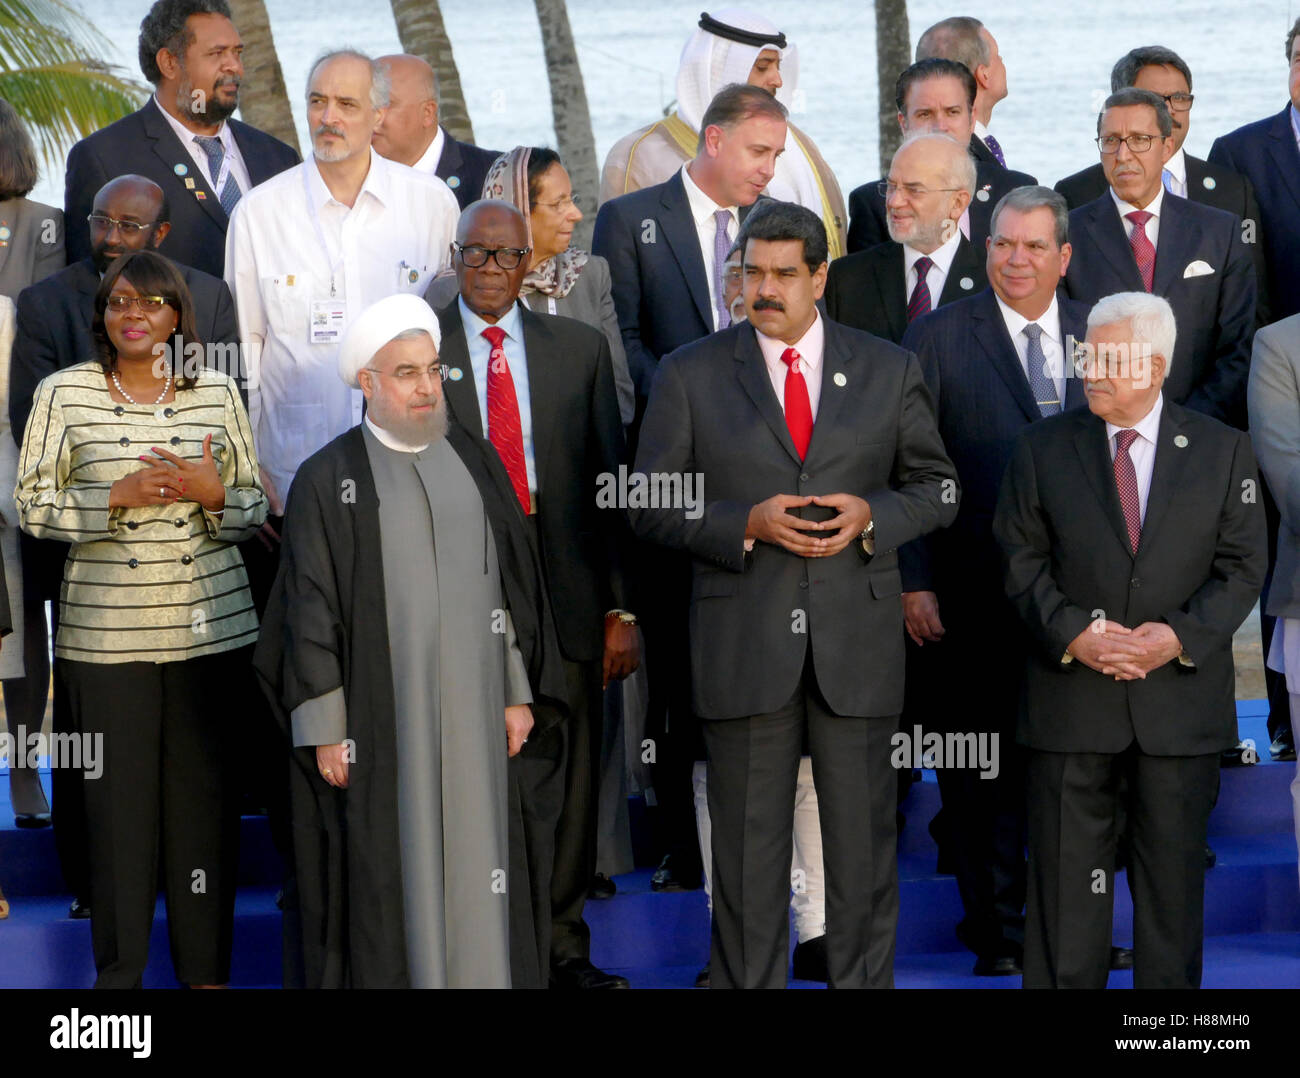 Porlamar, Venezuela. September 17th 2016 - Presidents of Delegations pose for the official photograph in the 17th Summit of the Stock Photo